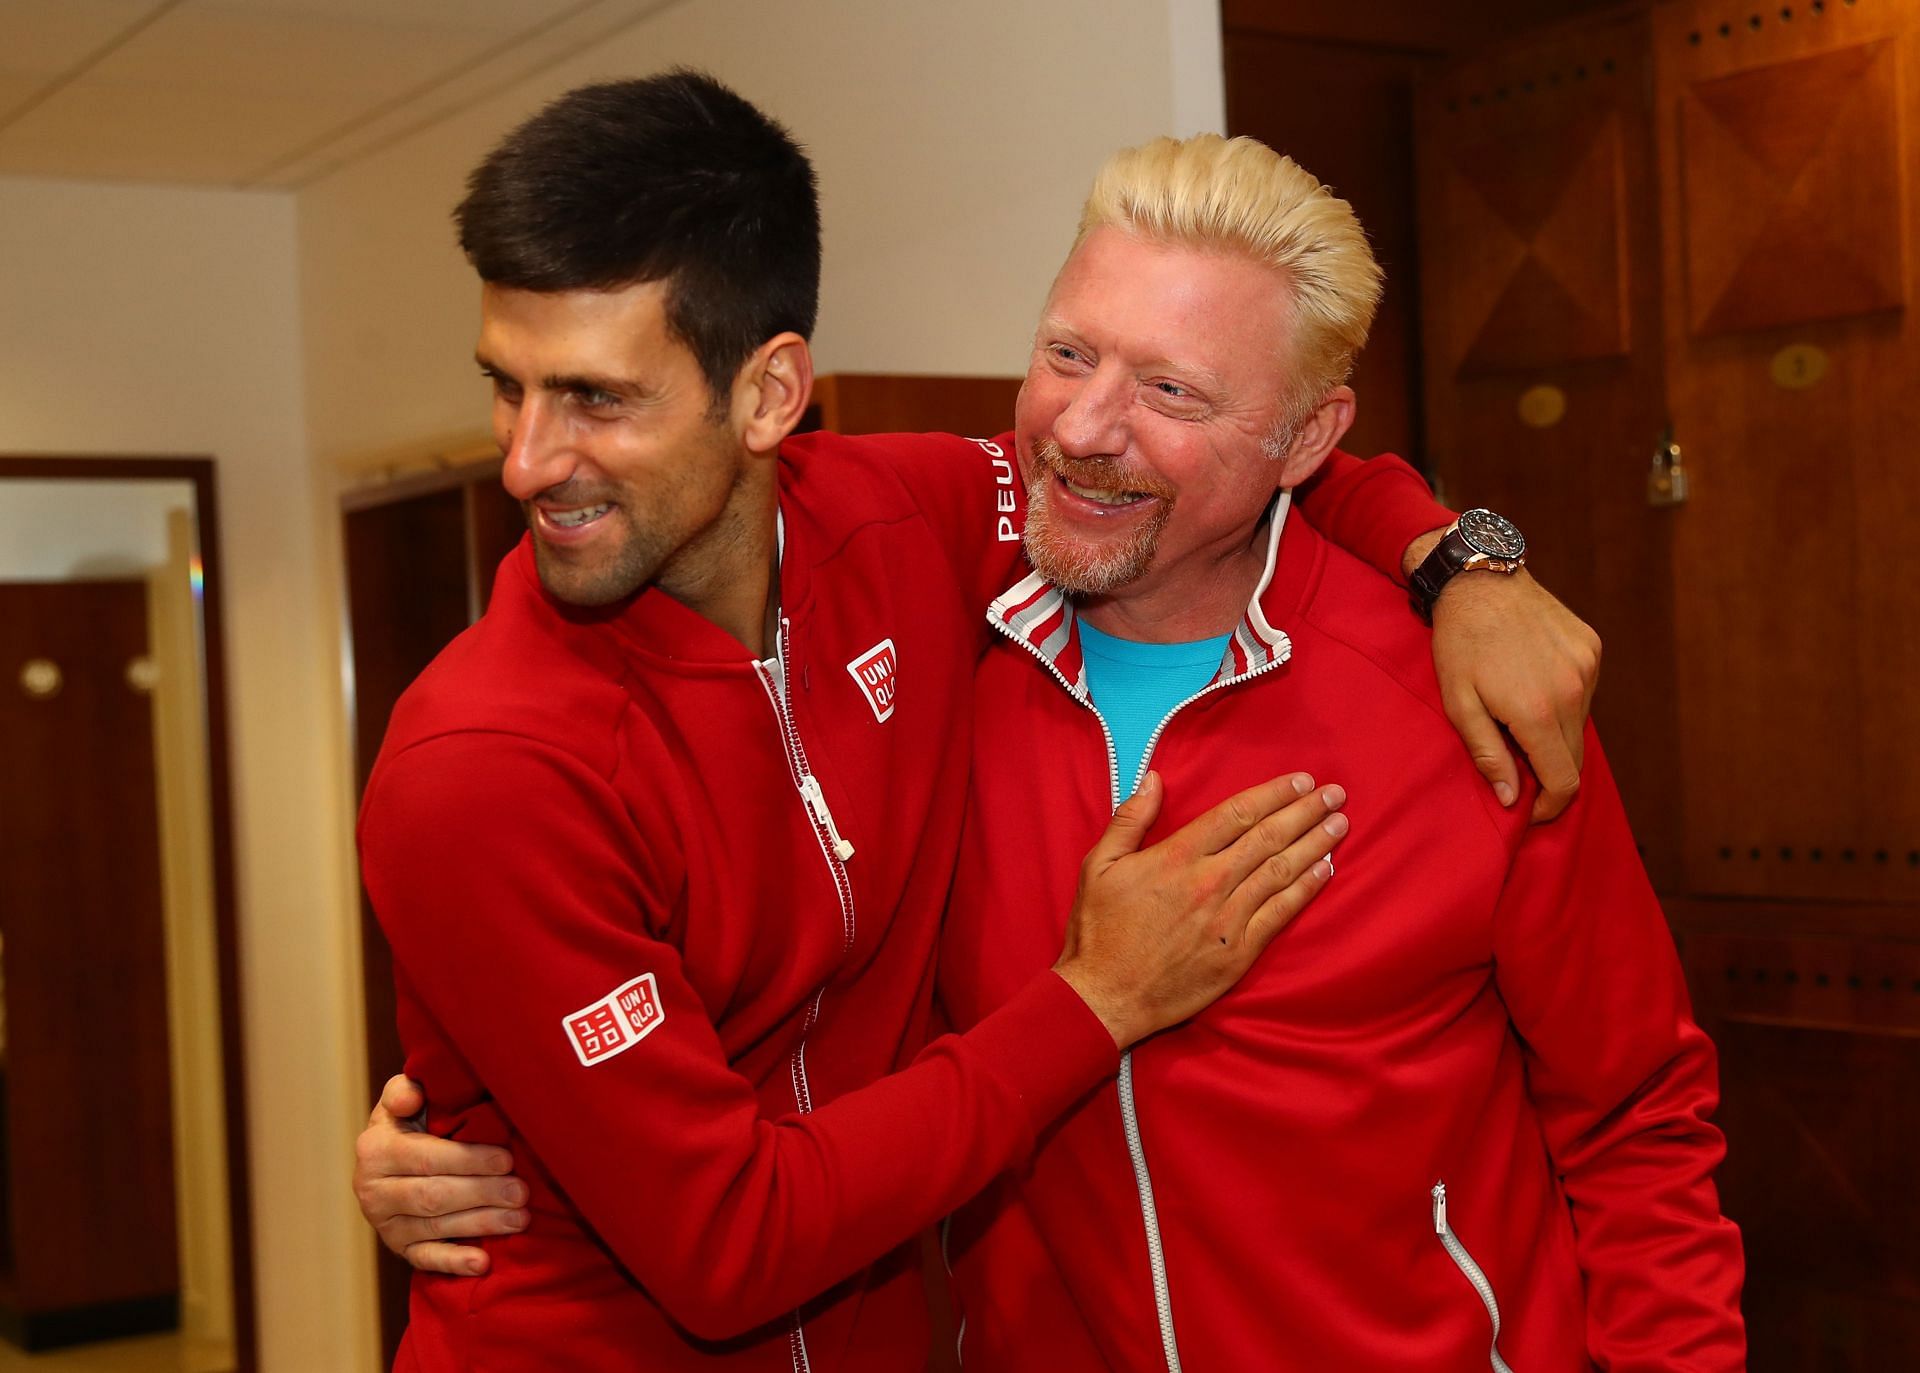 The World No. 1 might go back to Boris Becker, who is currently a free agent